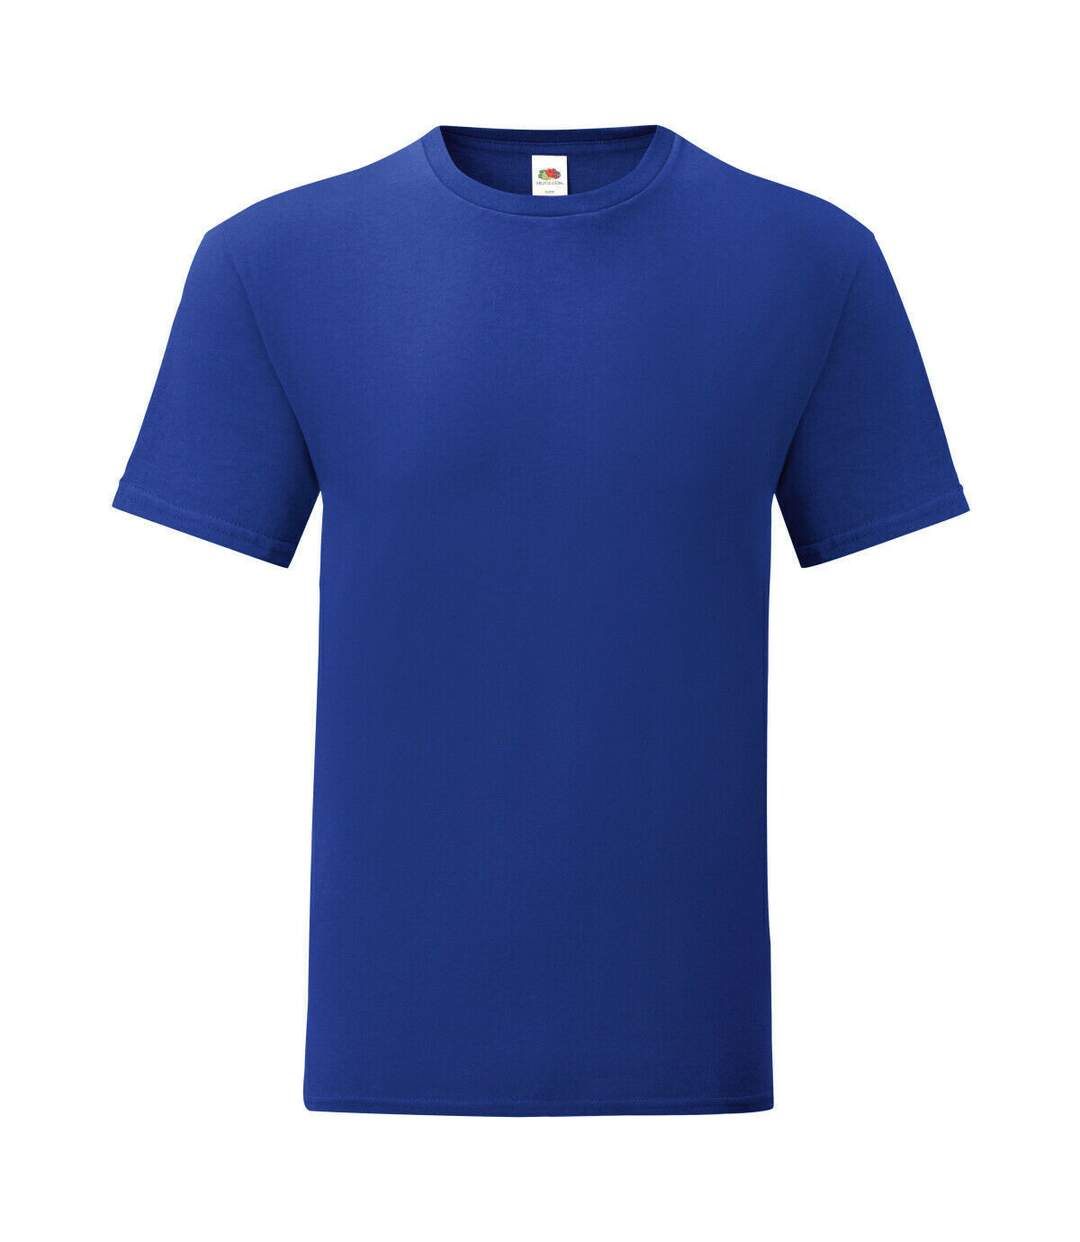 Fruit of the Loom Mens Iconic T-Shirt (Cobalt Blue)